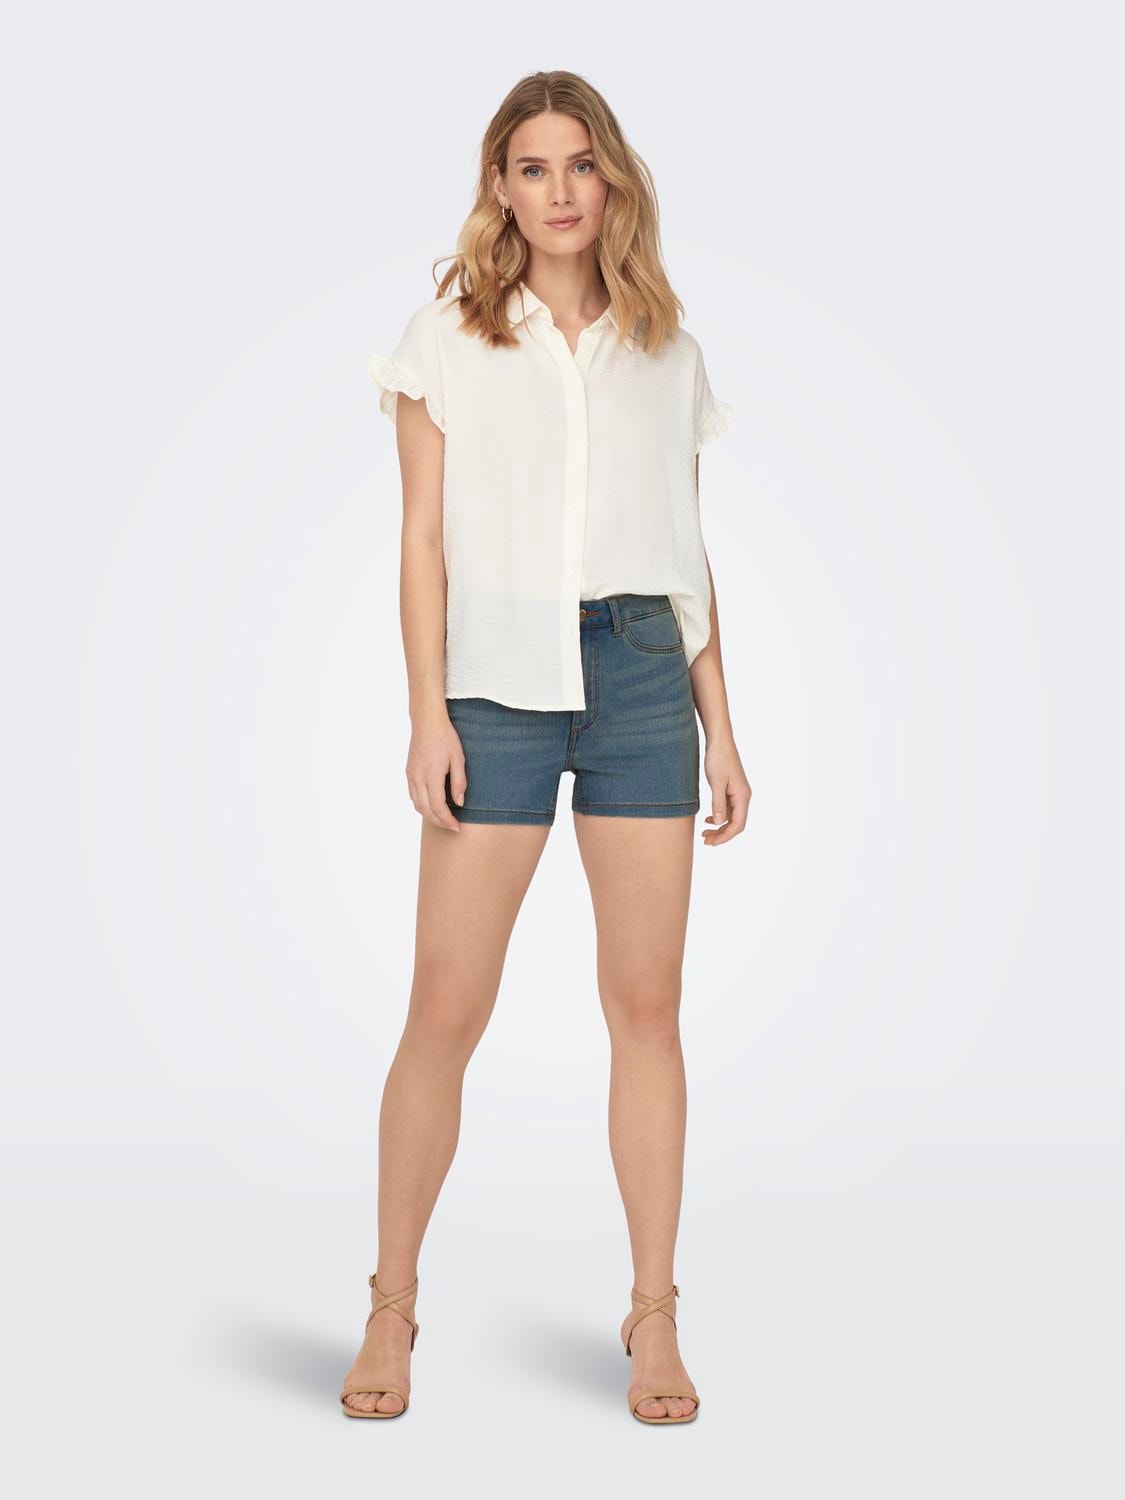 ONLY Shorts Skinny Fit Taille haute -Light Blue Denim - 15281789